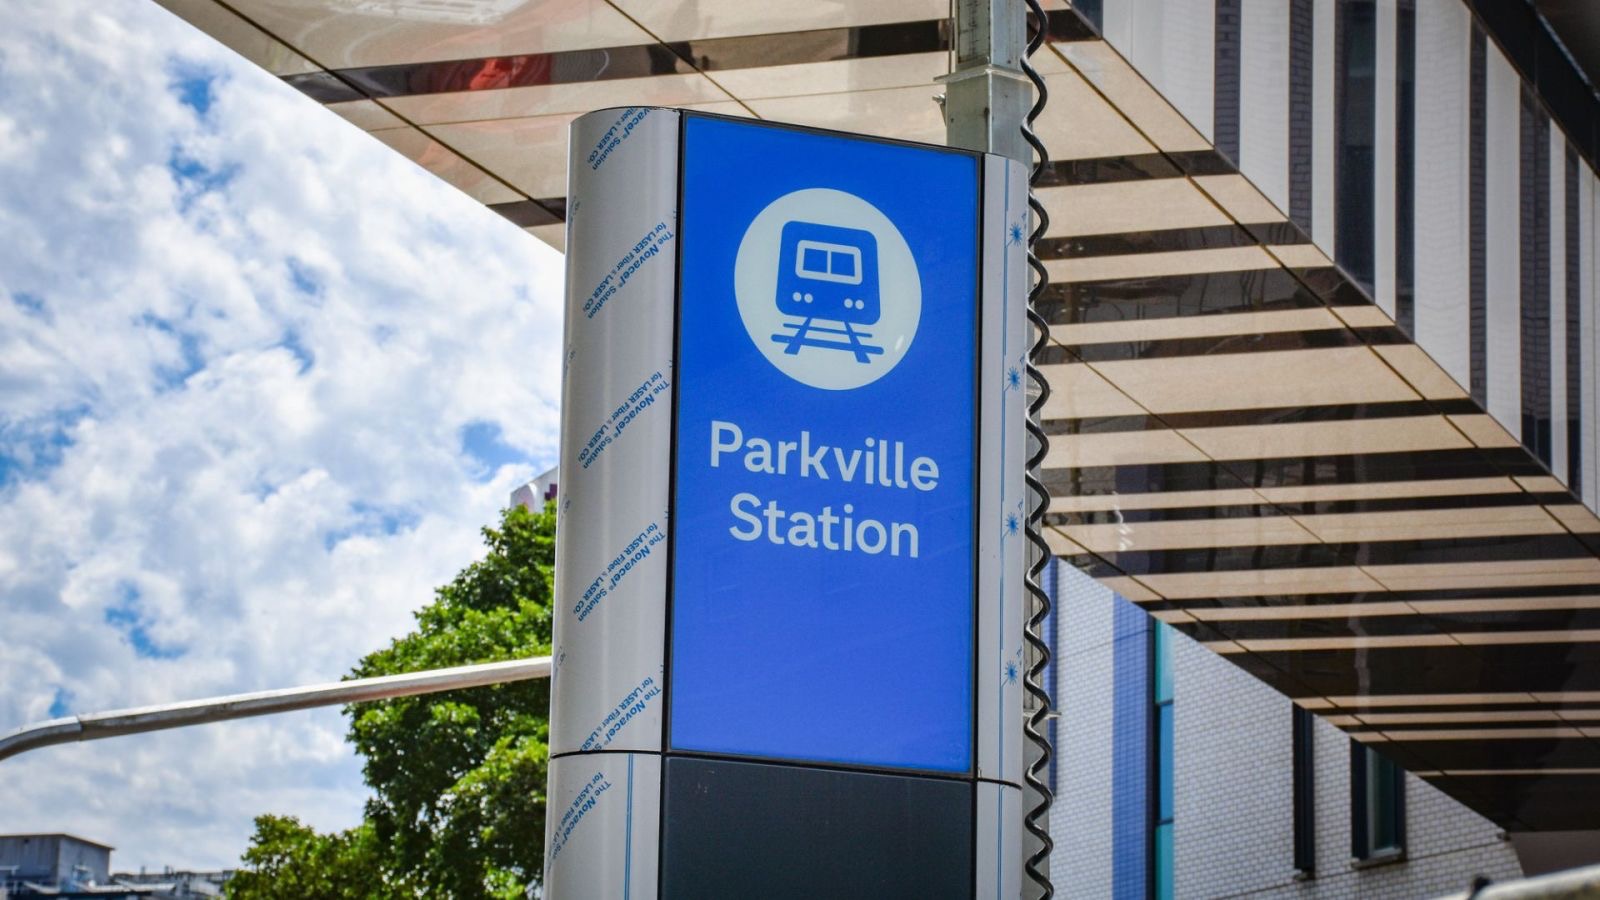 A map of Parkville Railway Station